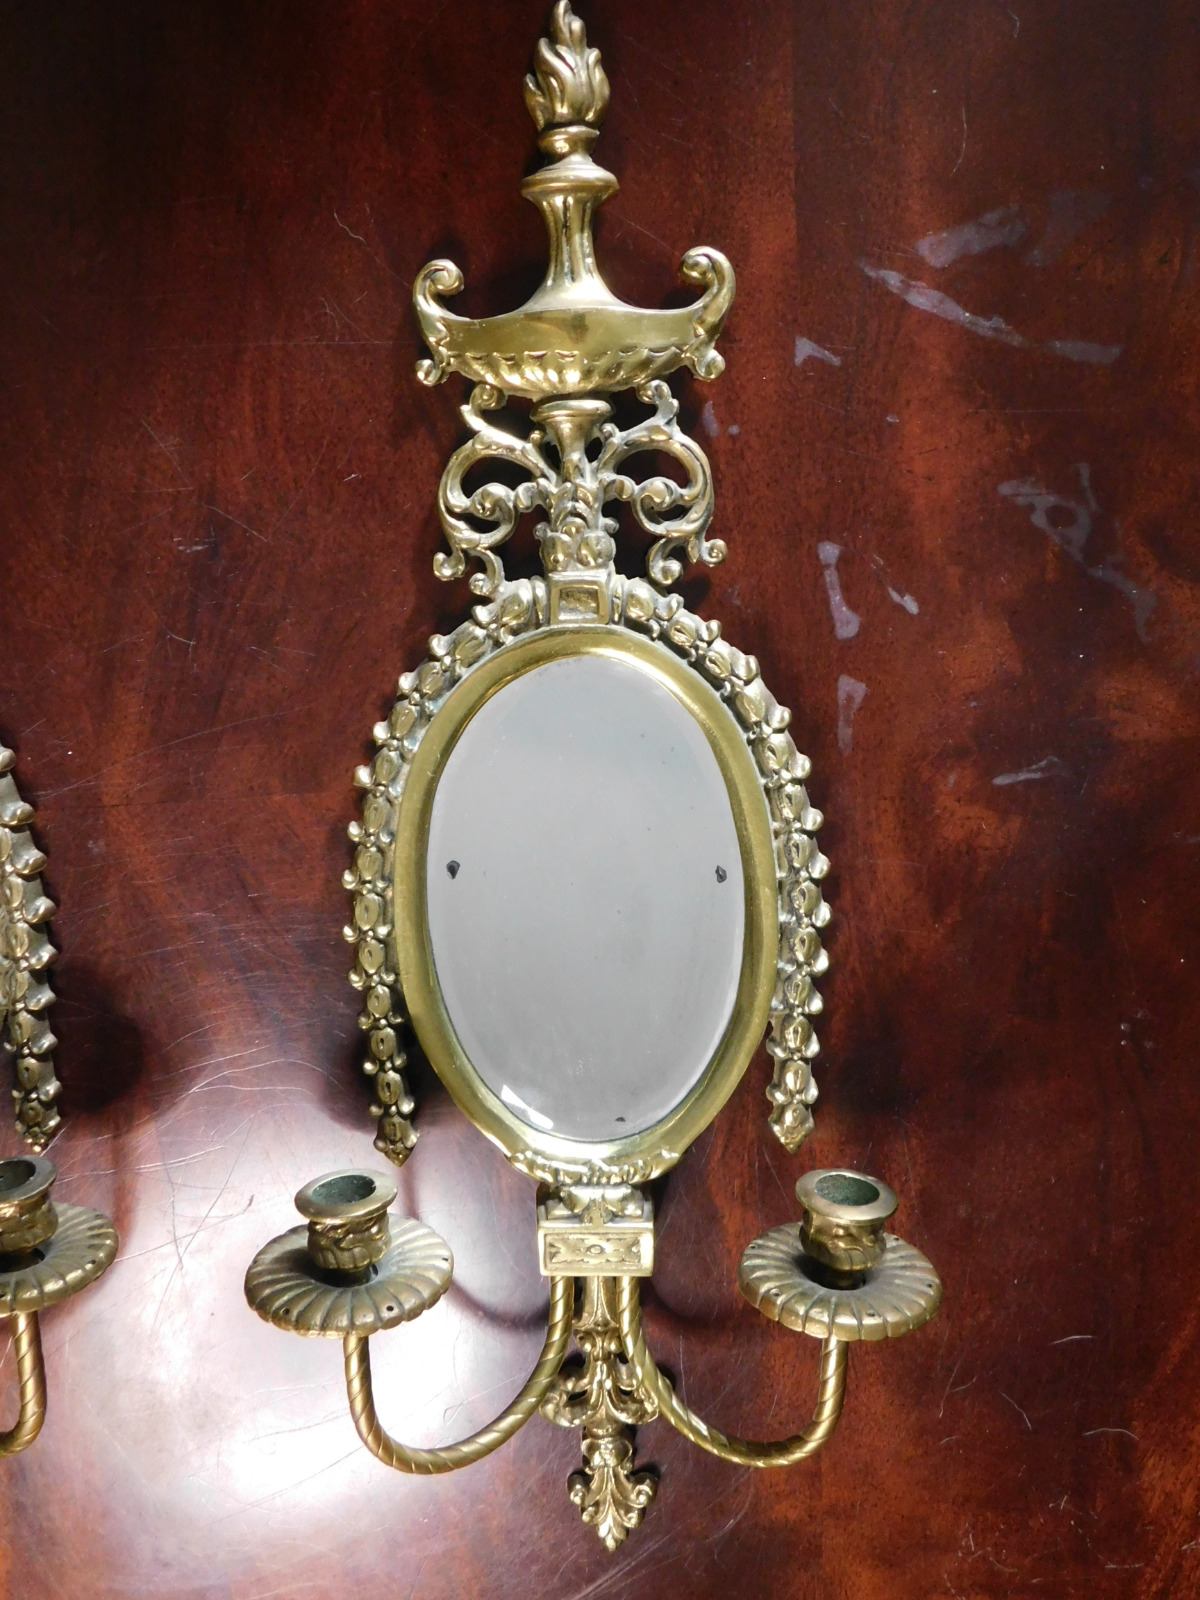 VTG Ornate GLO-MAR Bass Pair Wall Sconces w/ Mirror & Candle Holders 20th C.